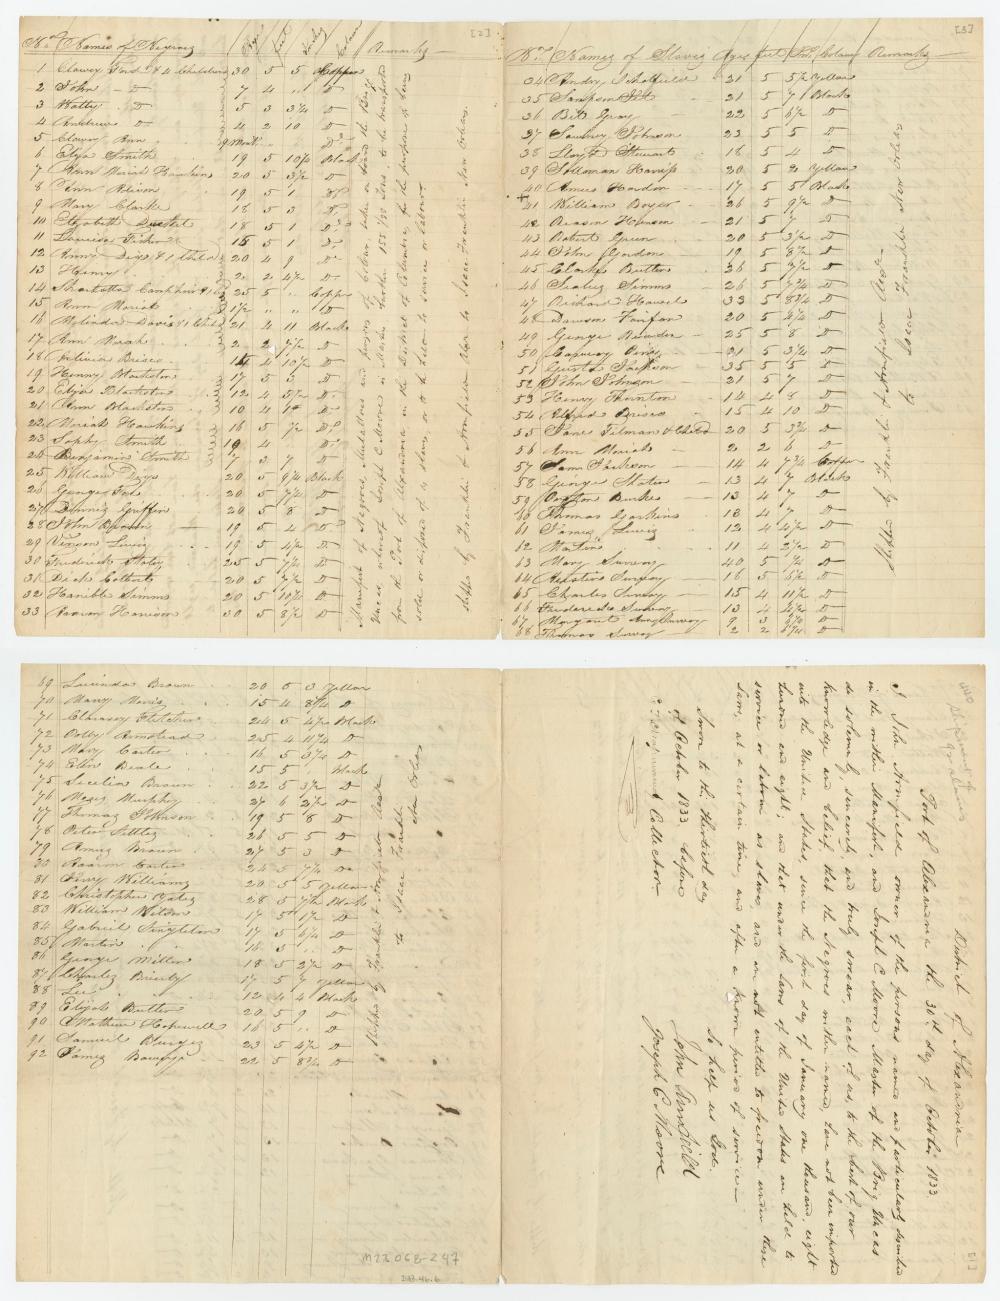 Manifest of the Brig Uncas, listing the names of 92 enslaved people being shipped to New Orleans, October 30, 1833.